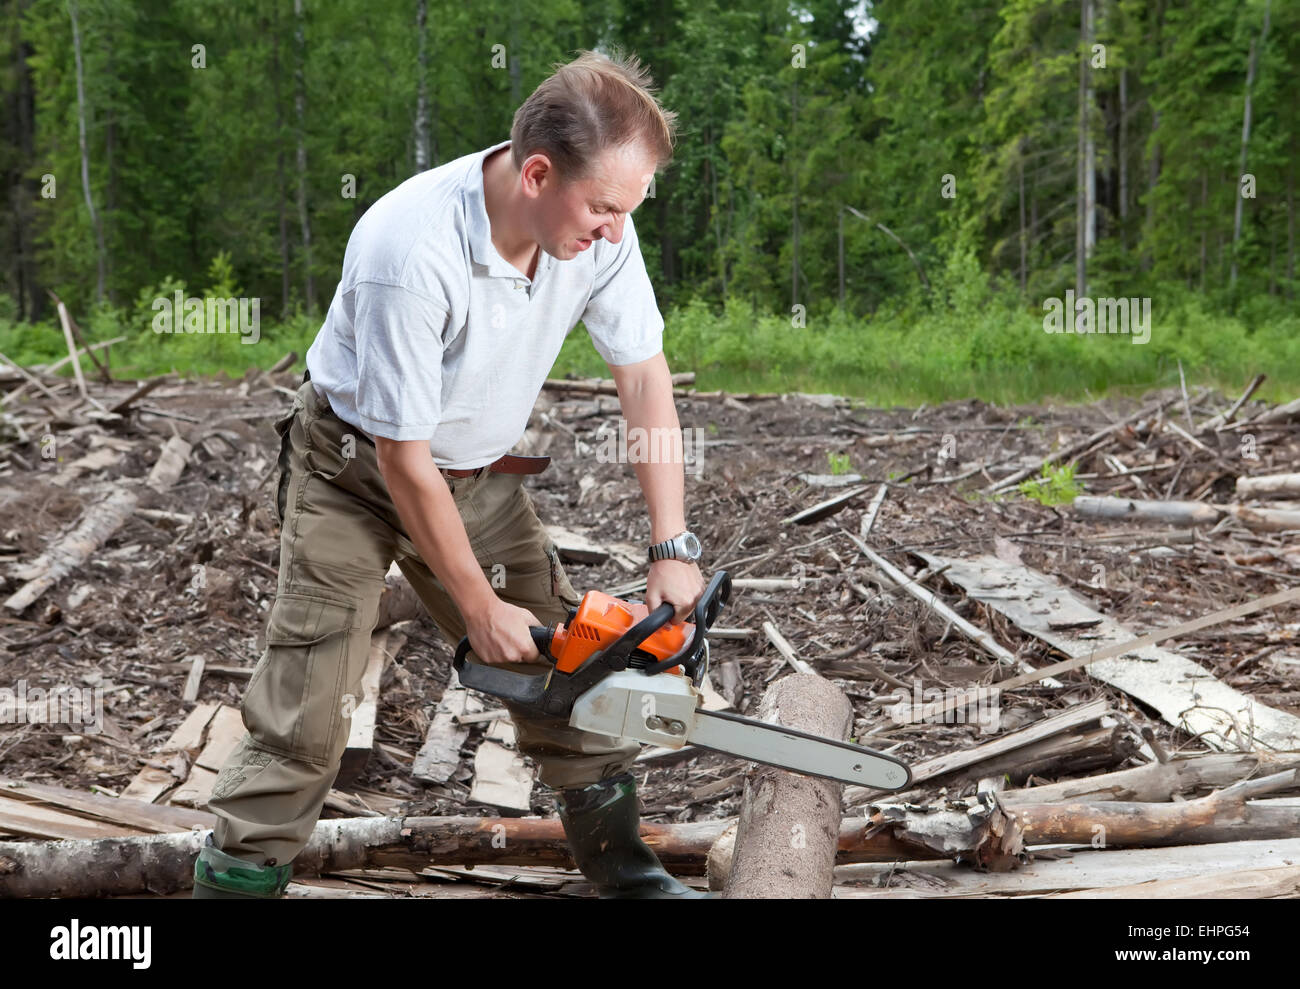 The man in wood saws a tree a chain saw Stock Photo